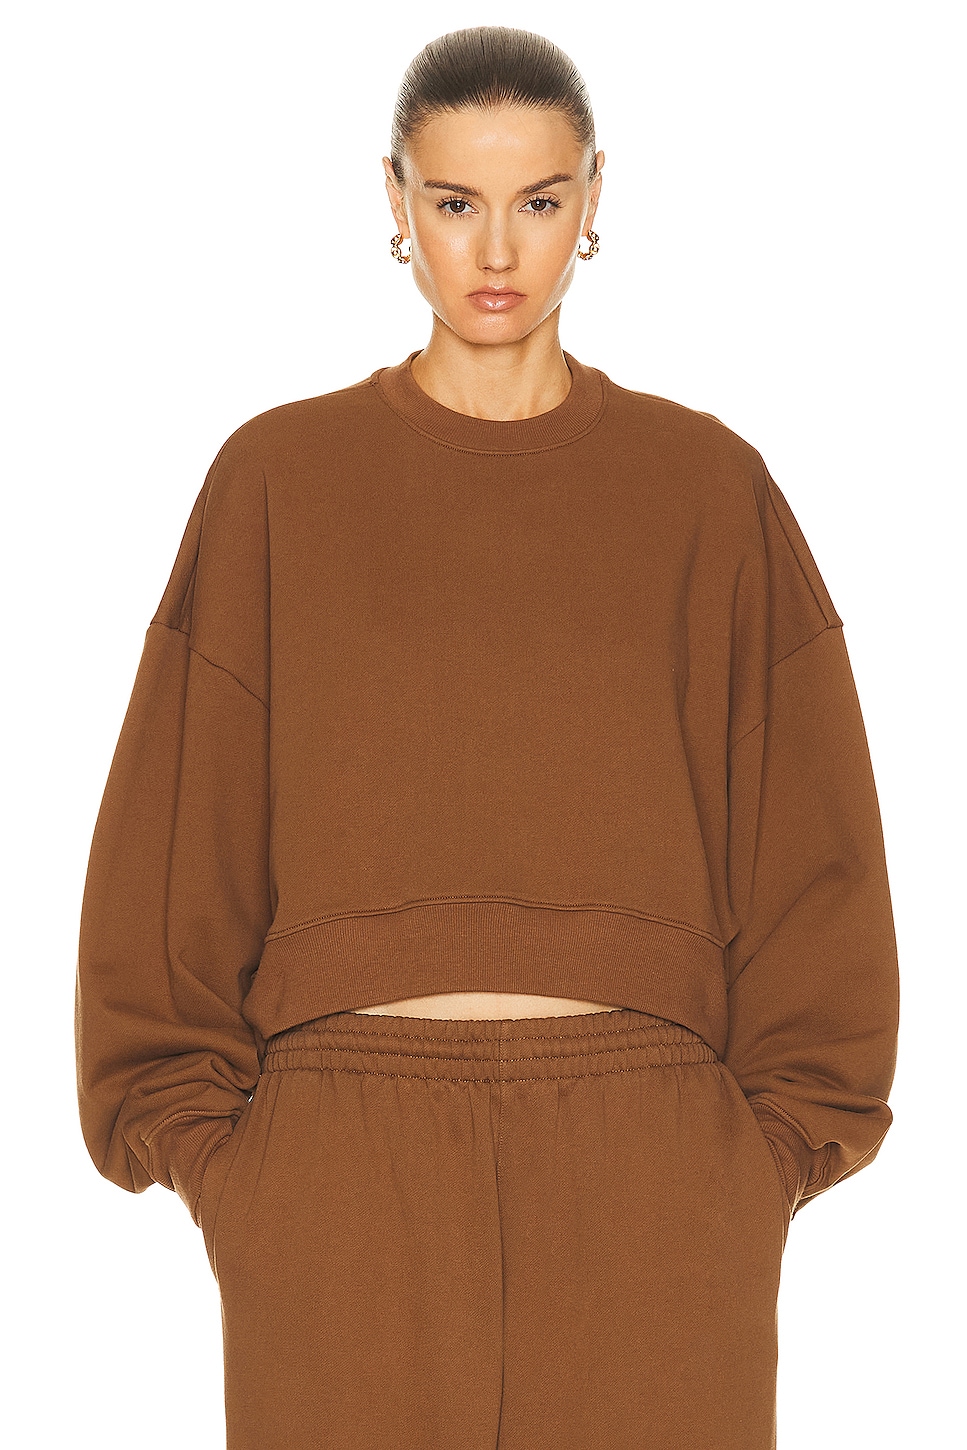 HB Track Top in Brown